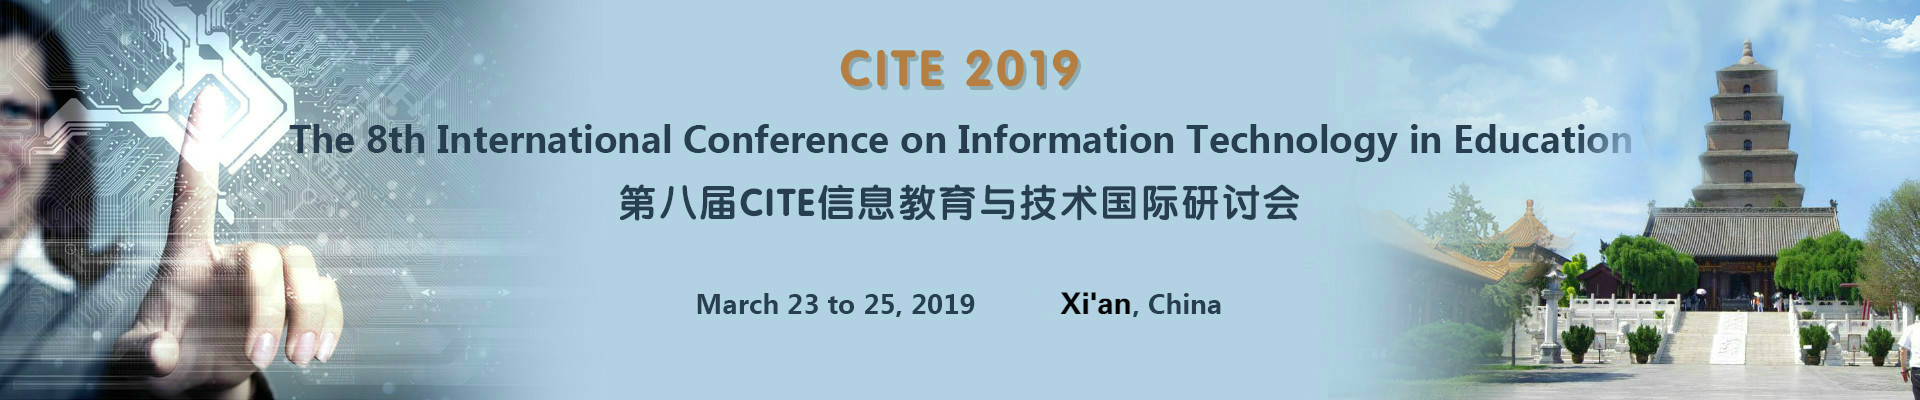 The 8th International Conference on Information Technology in Education (CITE 2019), Xi'an, Shanxi, China